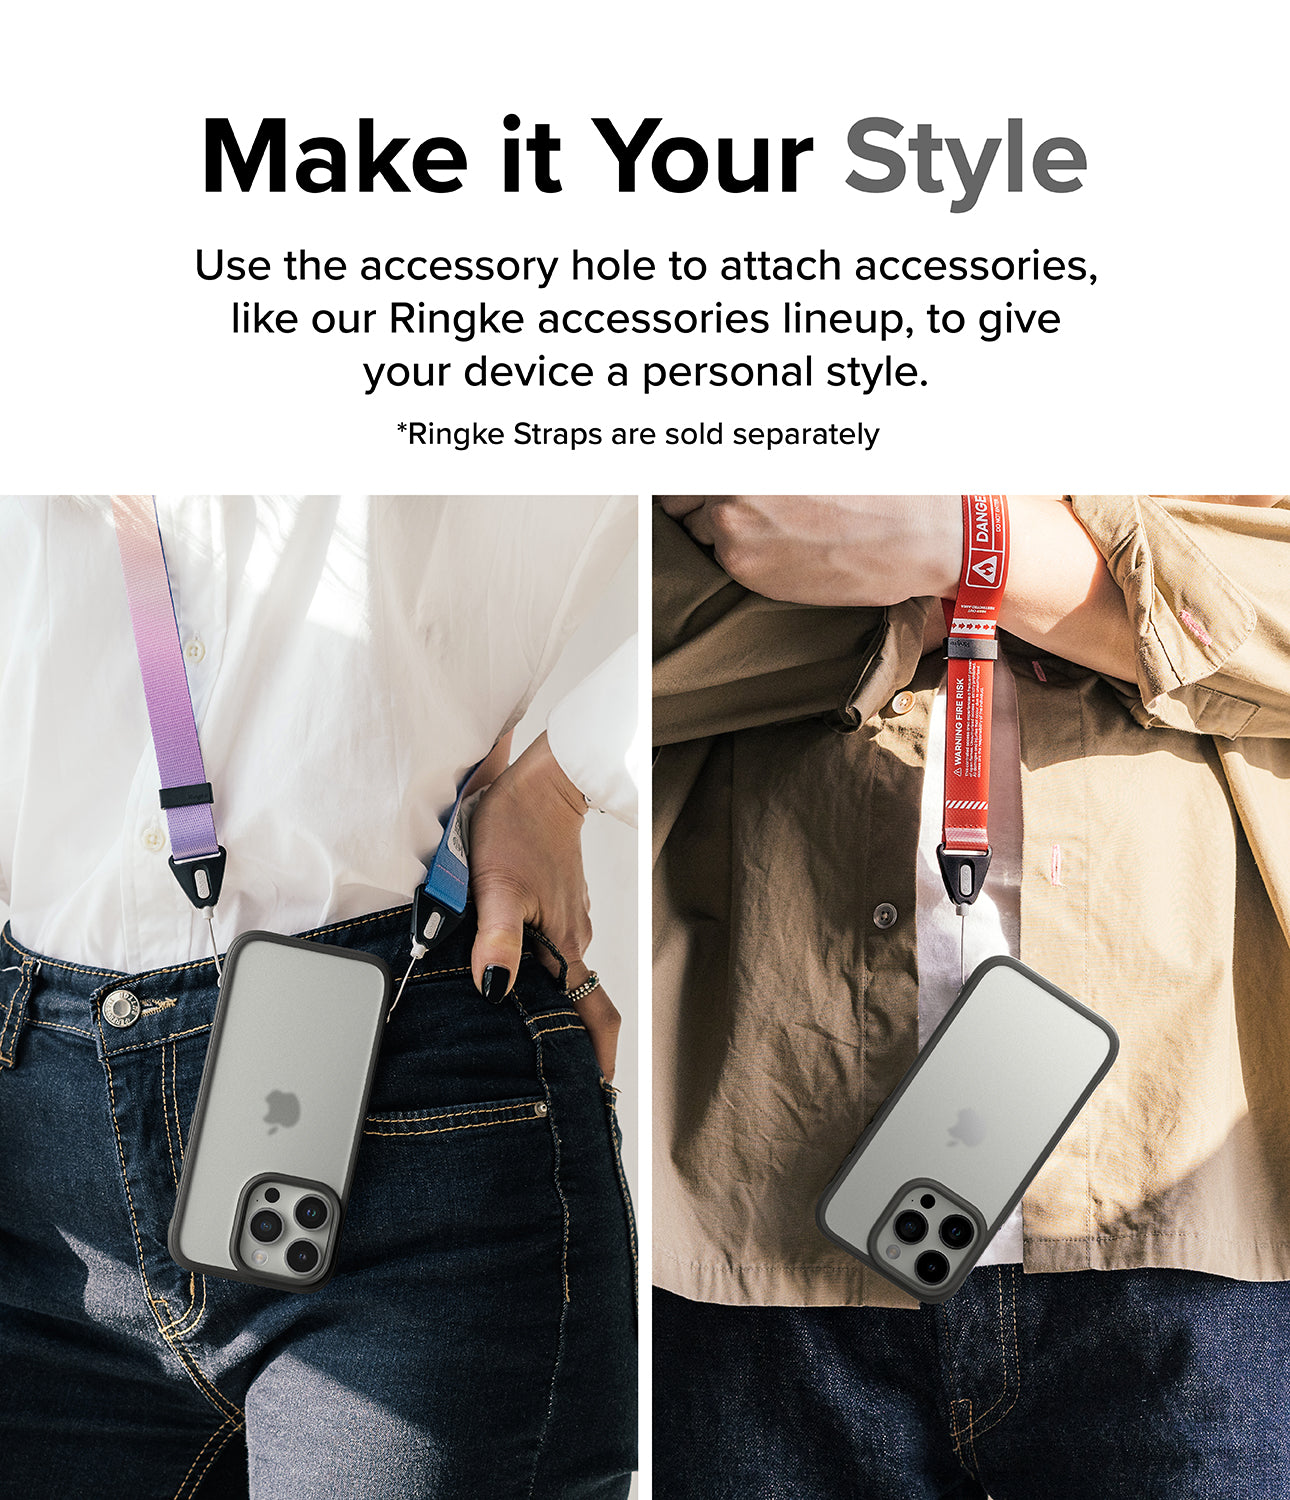 iPhone 15 Pro Case | Fusion Bold - Matte/Gray - Make it Your Style. Use the accessory hole to attach accessories, like our Ringke accessories lineup, to give your device a personal style.